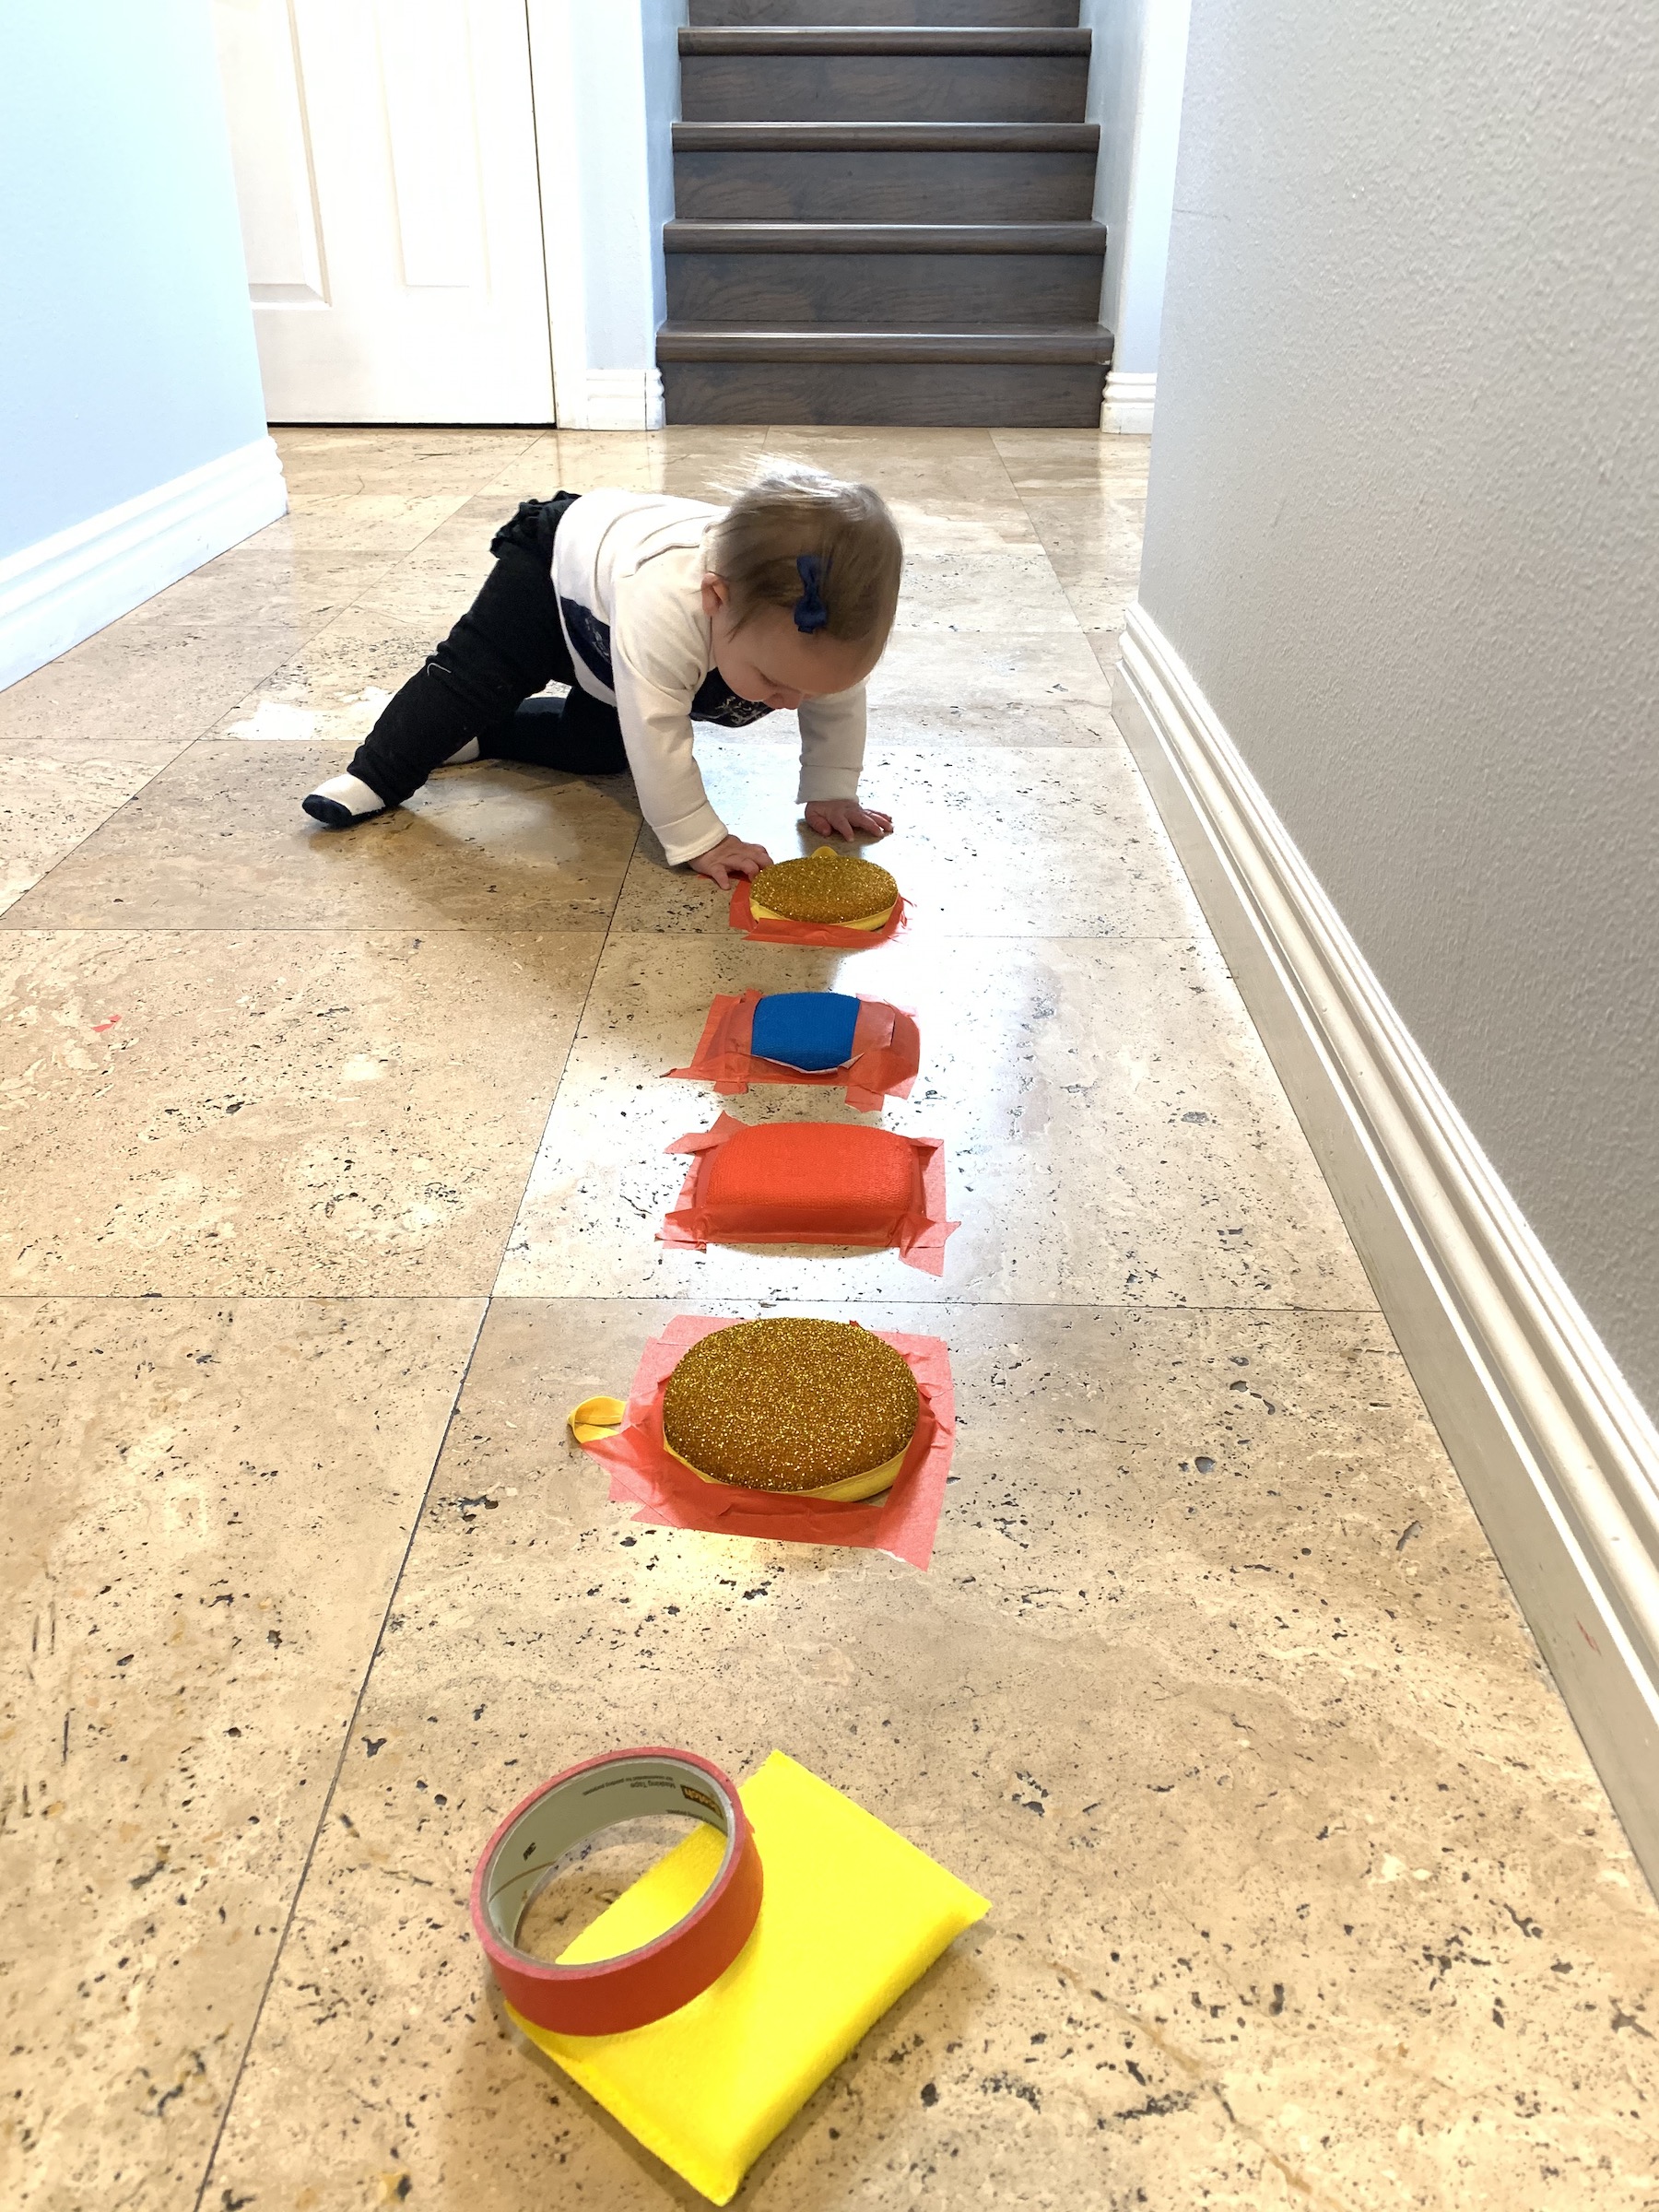 Sponges on ground in row baby crawling